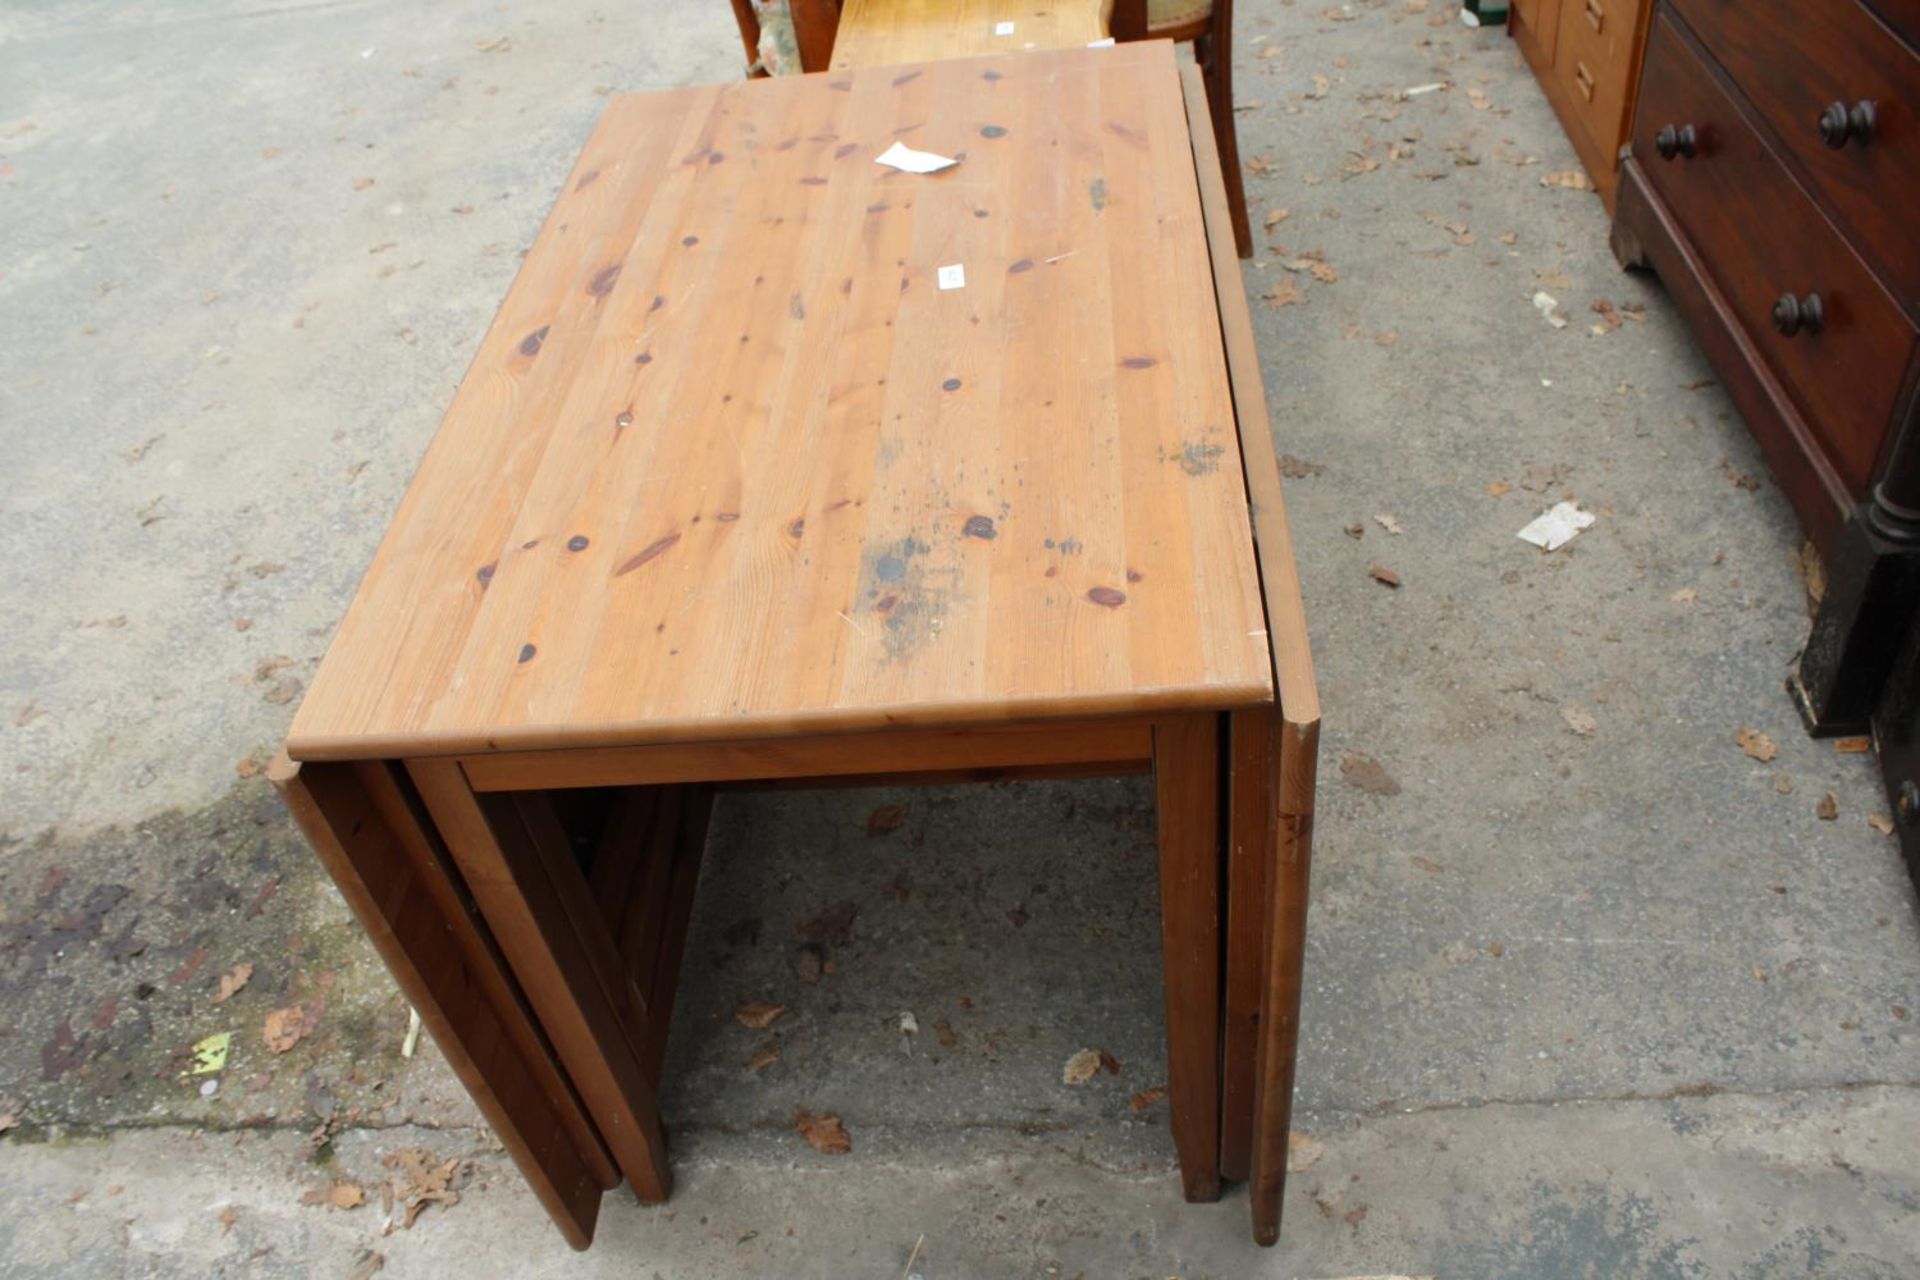 A MODERN PINE GATE-LEG DINING TABLE, 79.5" X 41" OPENED